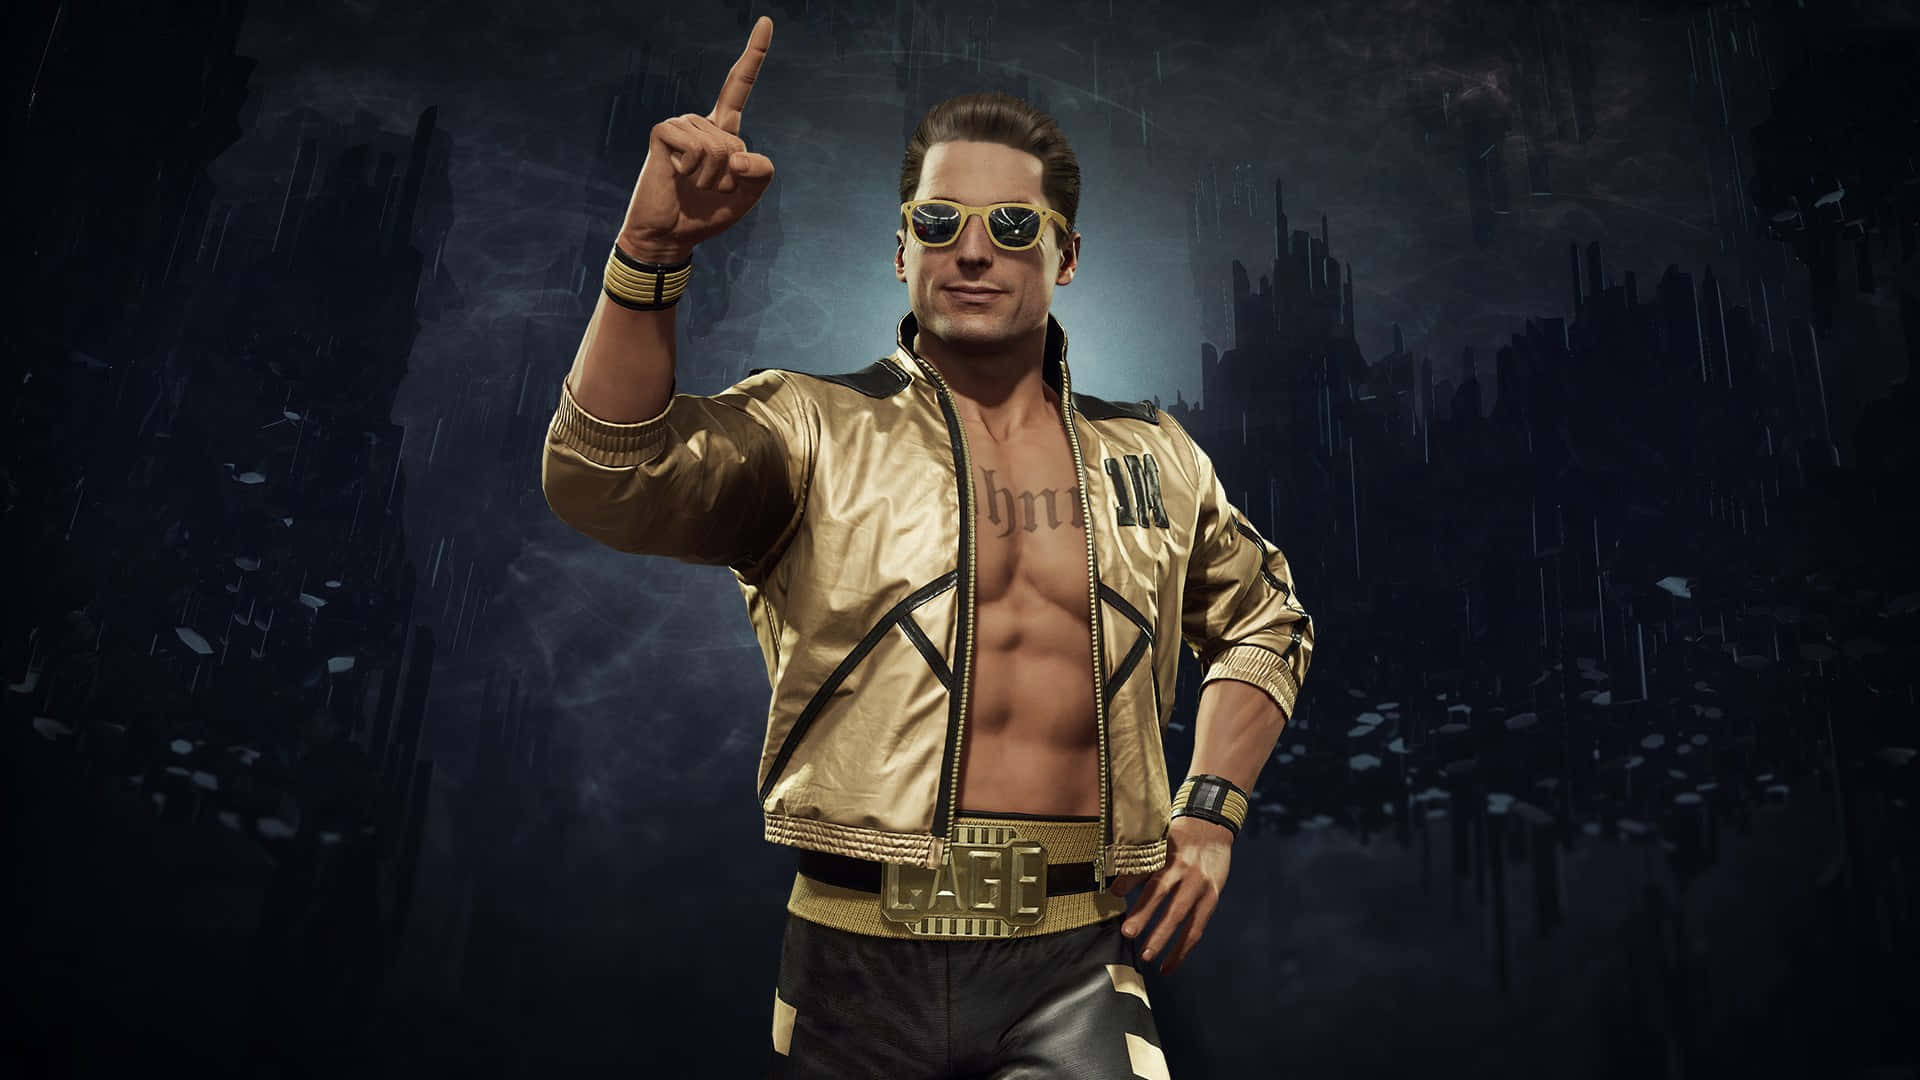 Johnny Cage, the iconic martial artist from Mortal Kombat, striking a winning pose. Wallpaper